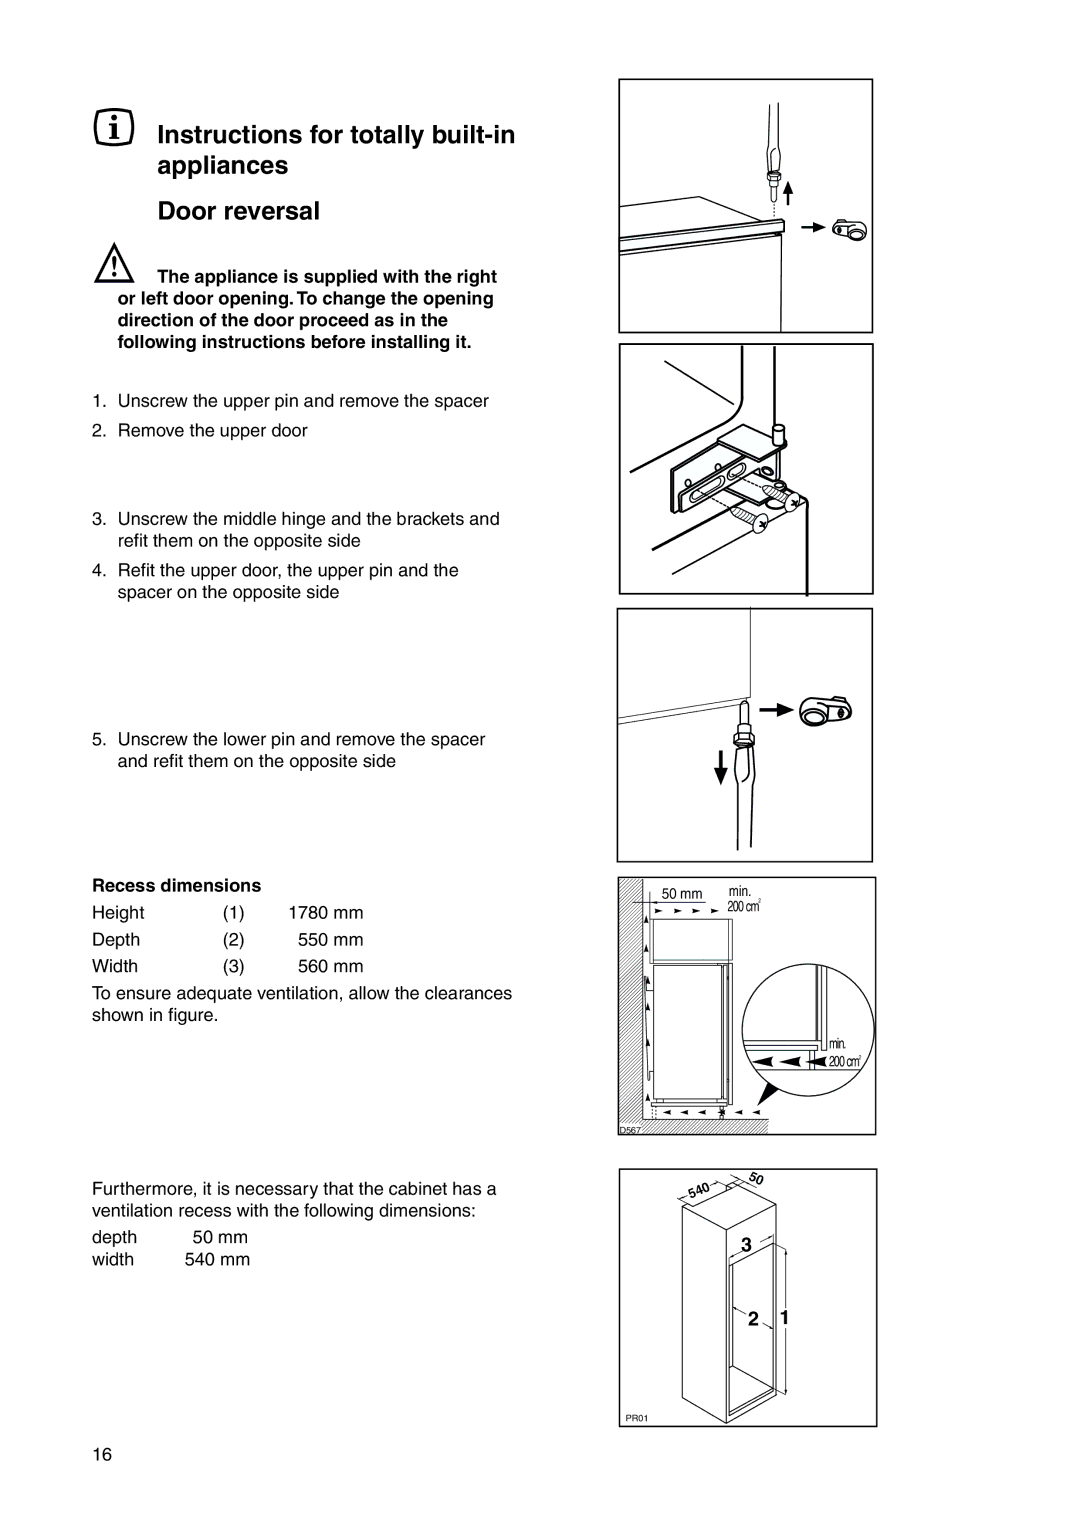 Electrolux ERN 28600 user manual Instructions for totally built-in appliances Door reversal, Recess dimensions 